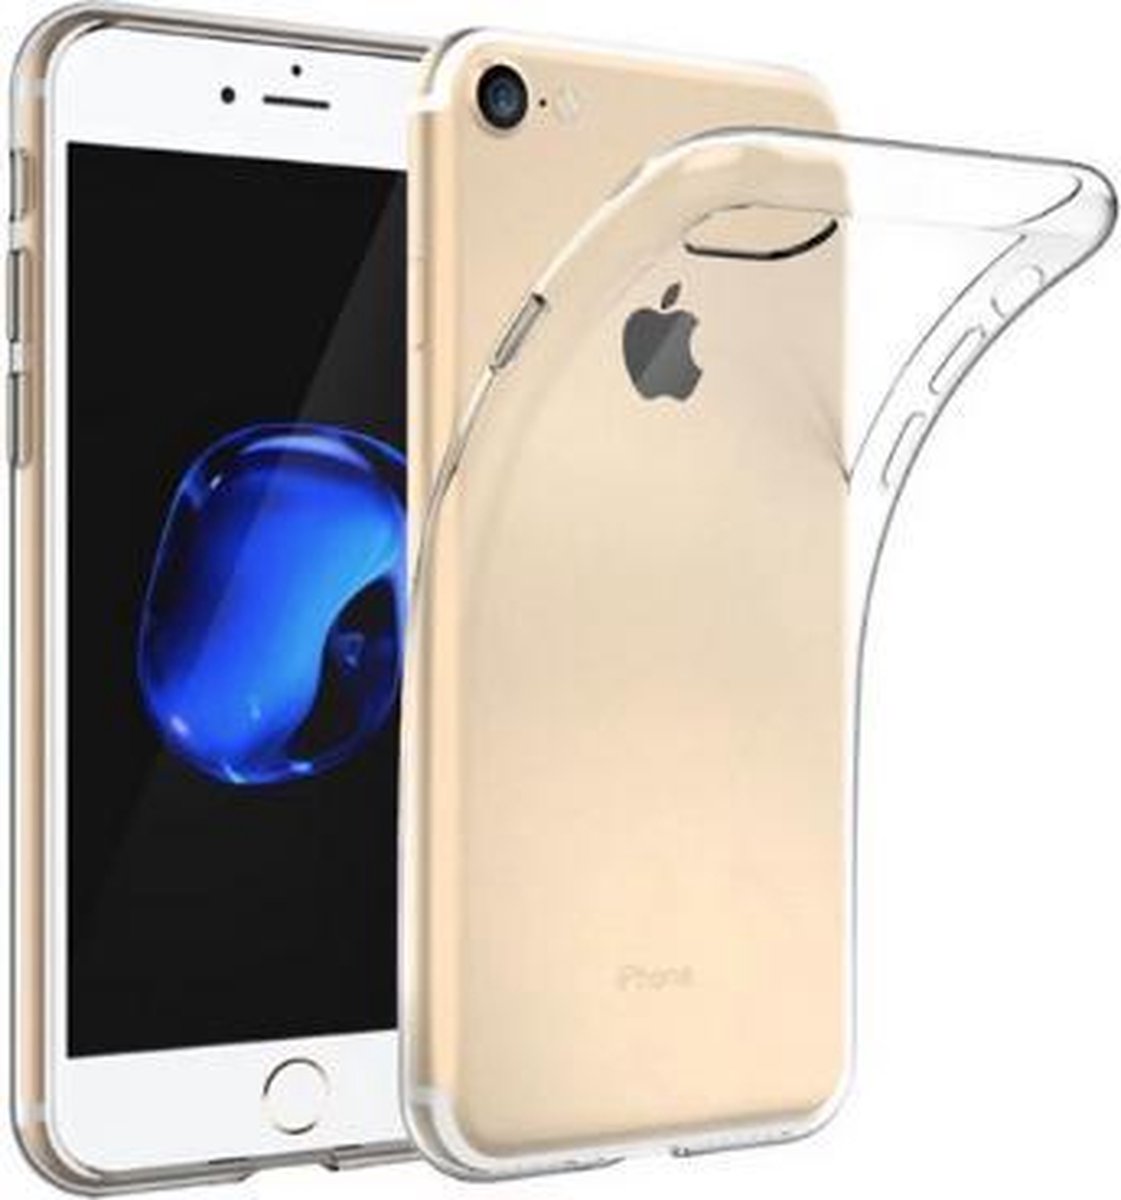 iPhone 8 Hoesje Transparant - Siliconen Case